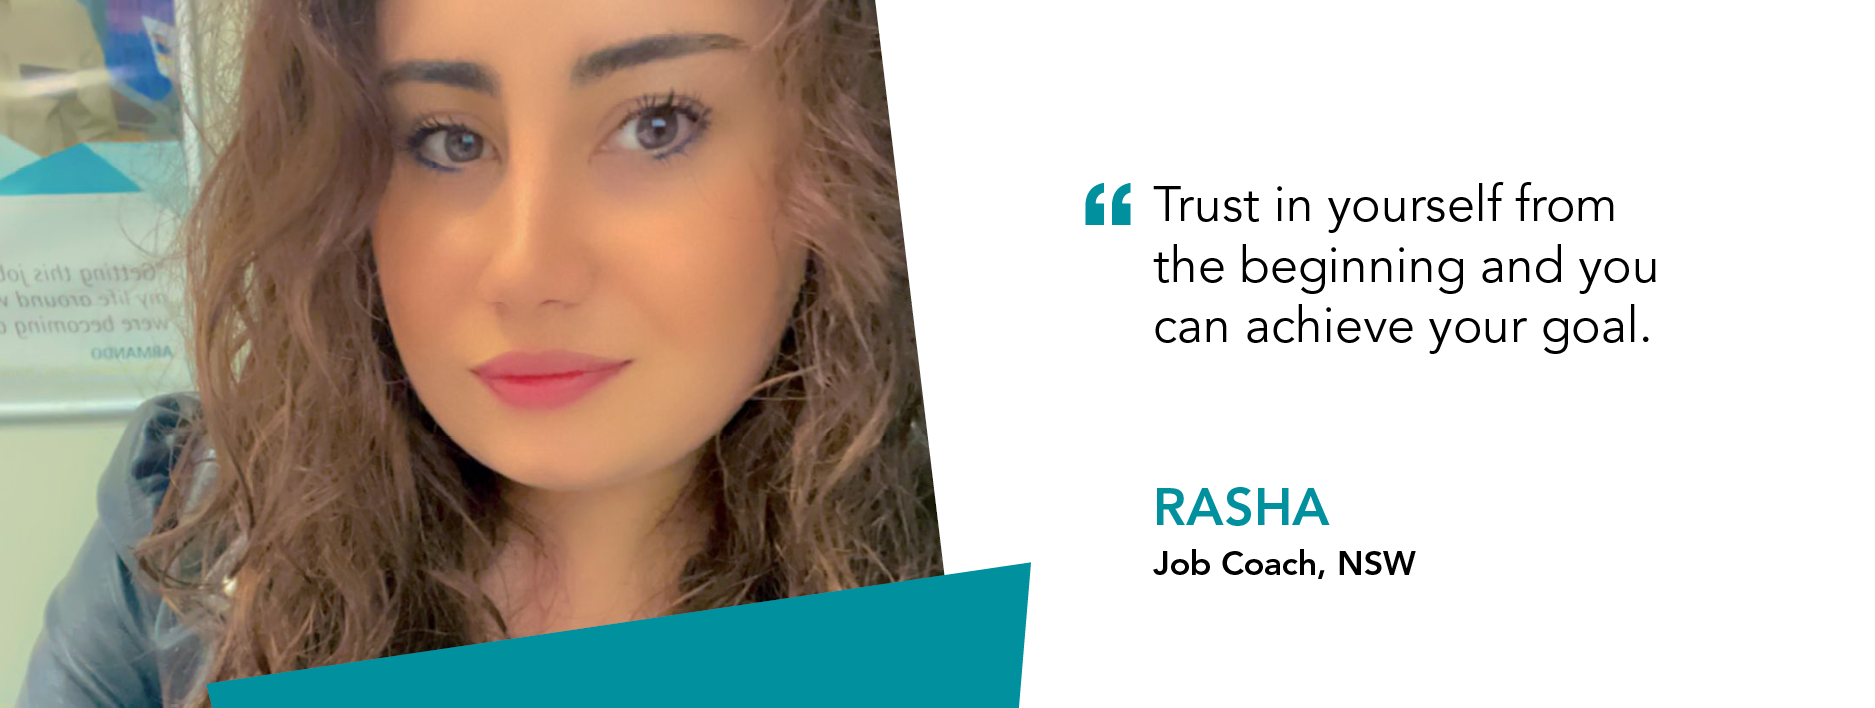 "Trust in yourself from the beginning and you can achieve your goal" Rasha, Job Coach, NSW